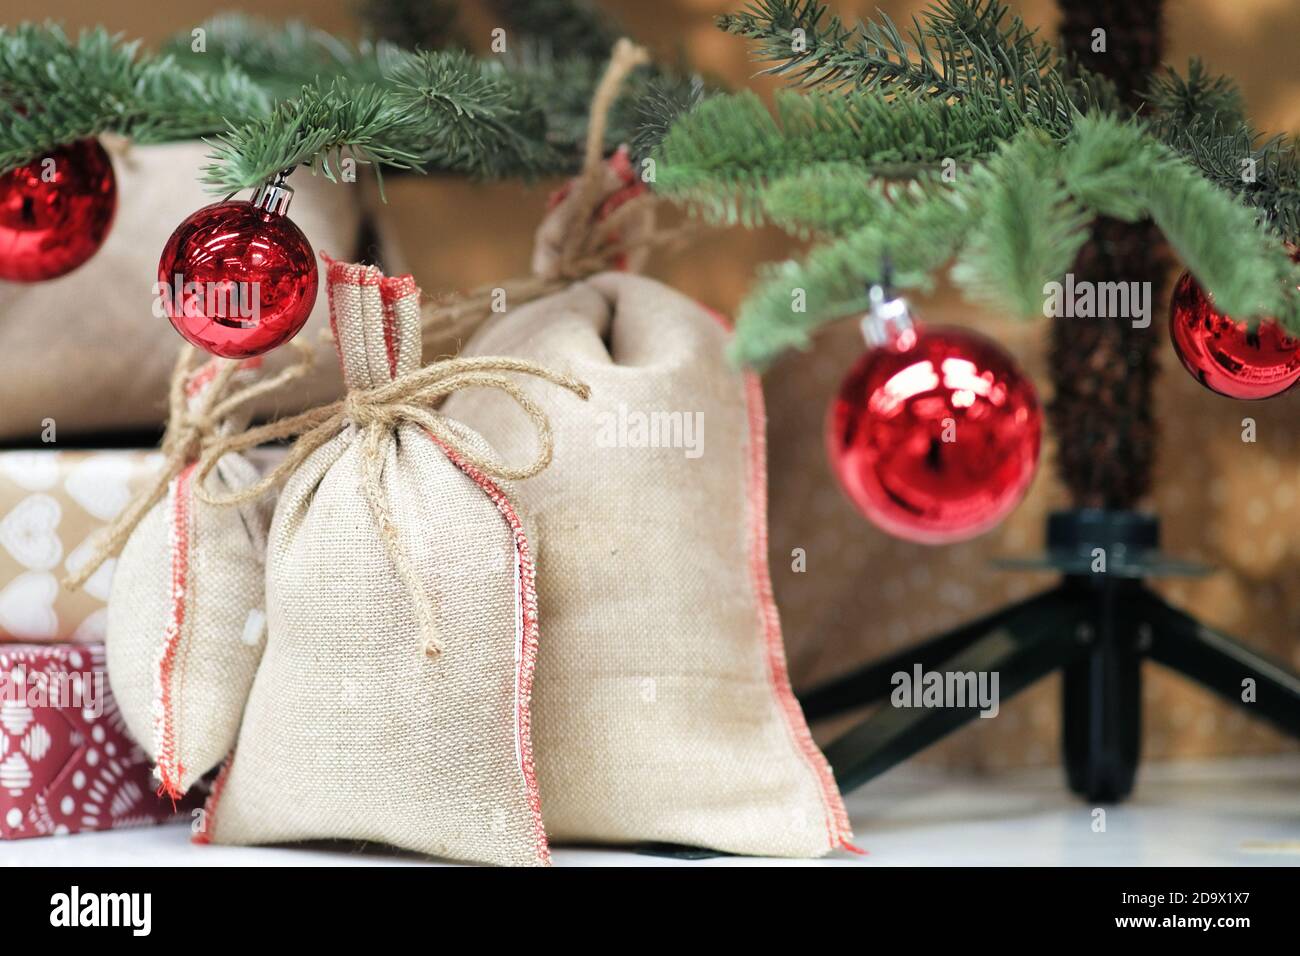 Wrapped gifts under the Christmas tree. Canvas bags, surprise gifts for children Stock Photo